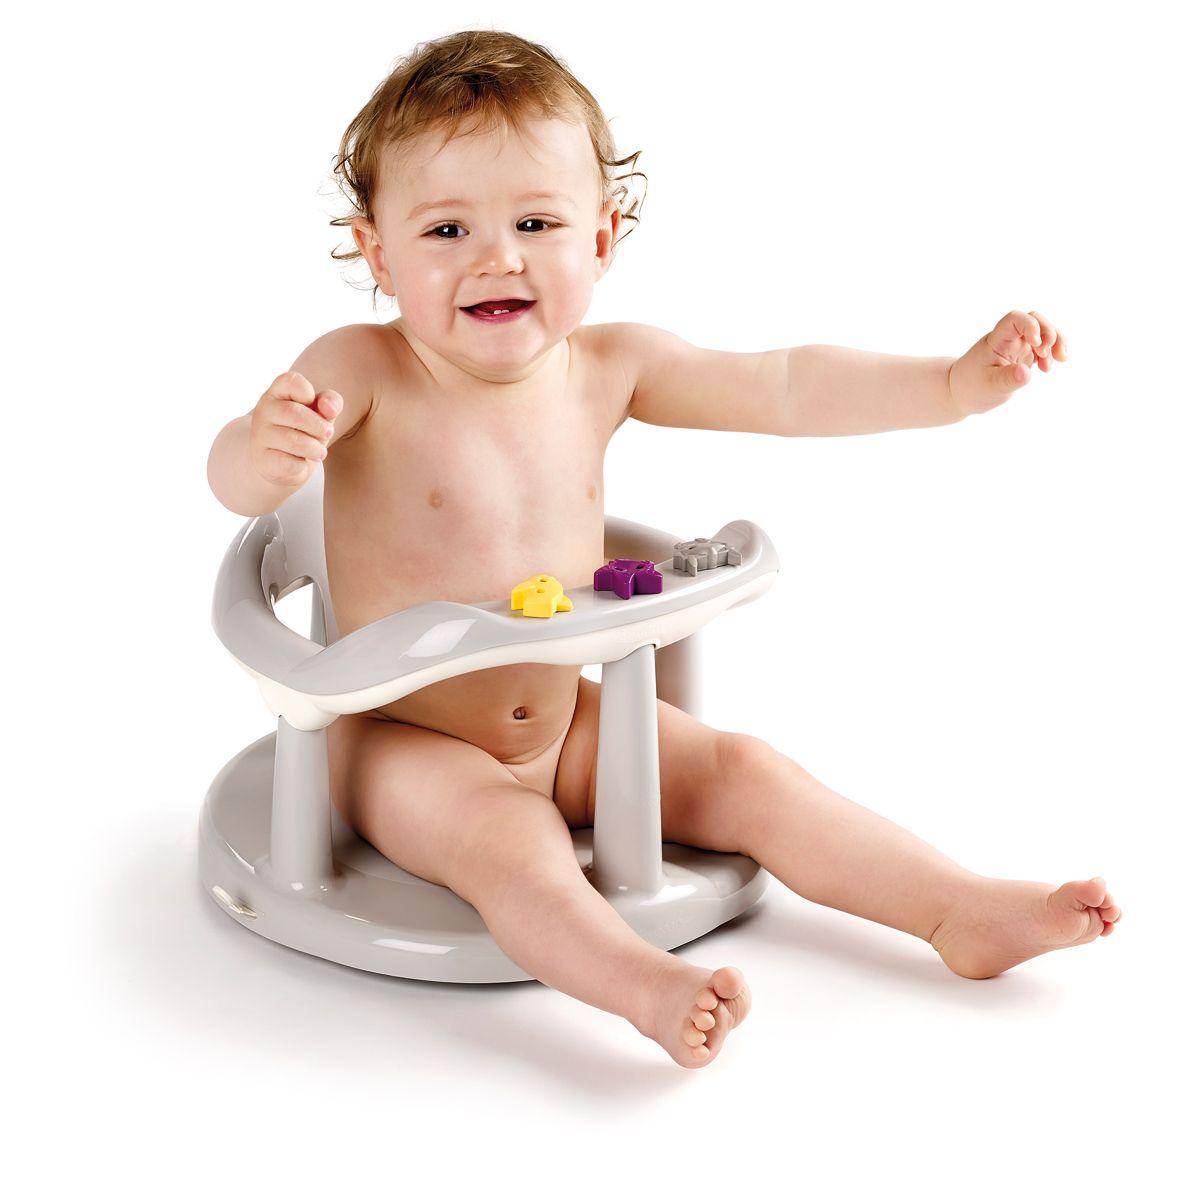 Thermobaby - Thermobaby Bath seat Aquababy - Mari Kali Stores Cyprus